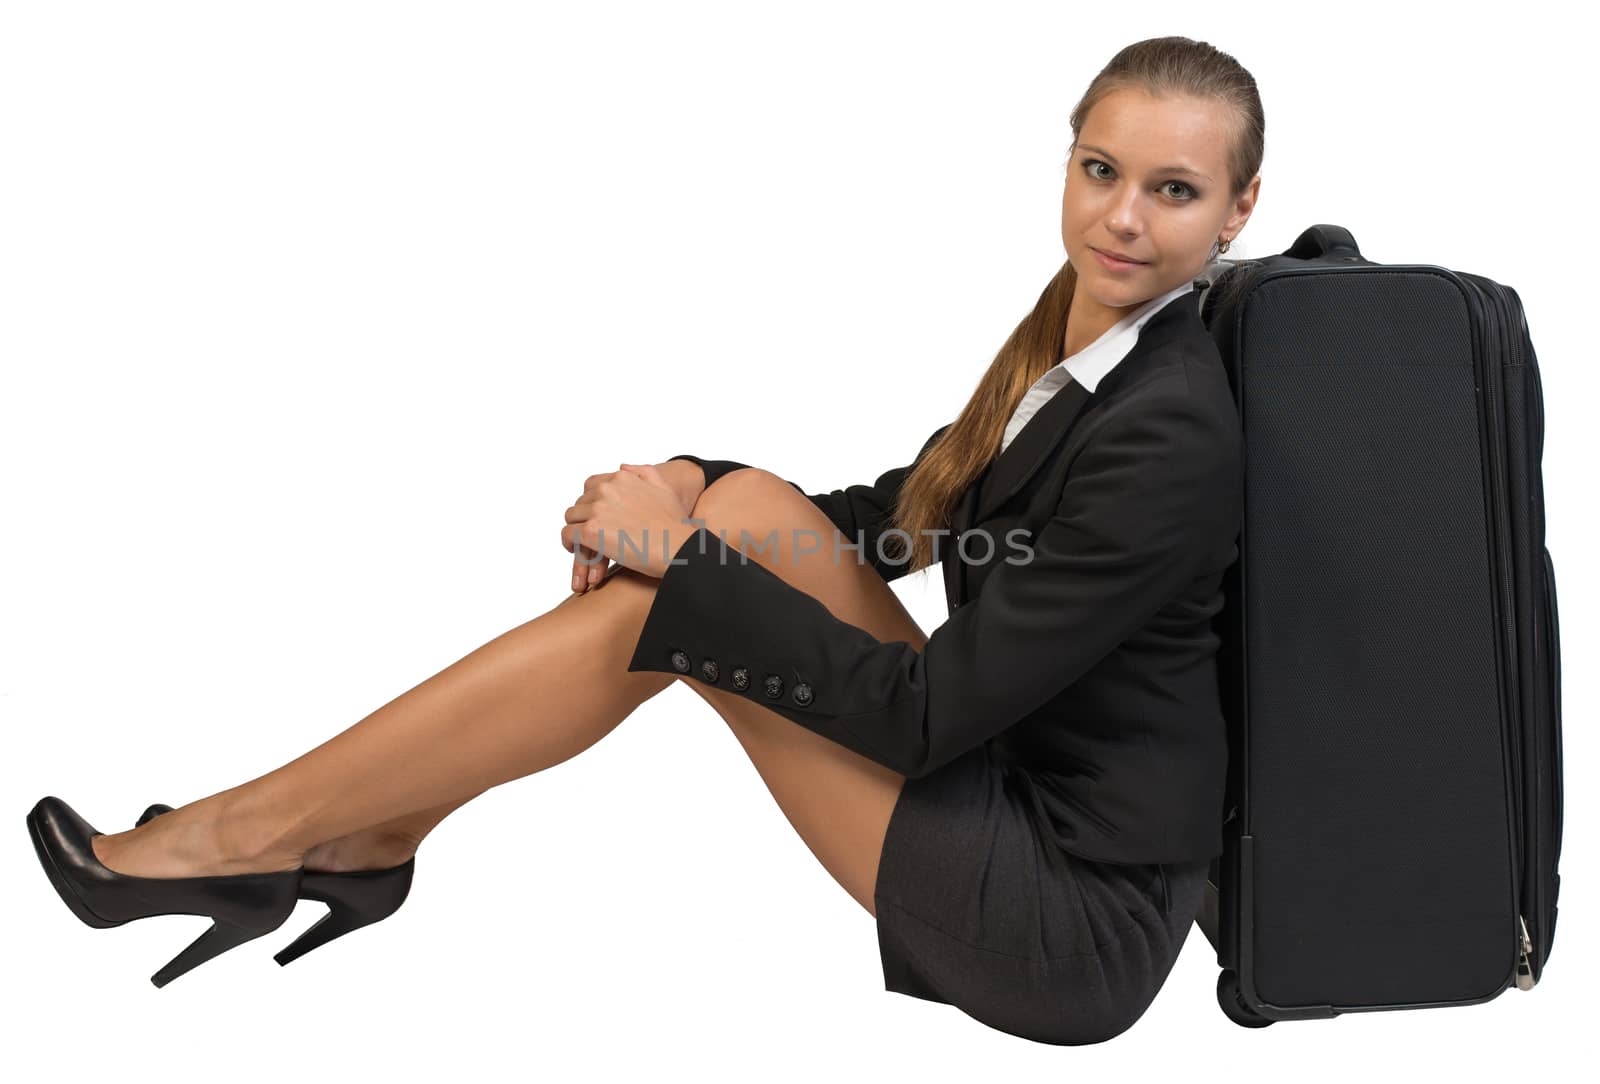 Businesswoman sitting next to side view suitcase, hugging her knees, looking at camera. Isolated over white background